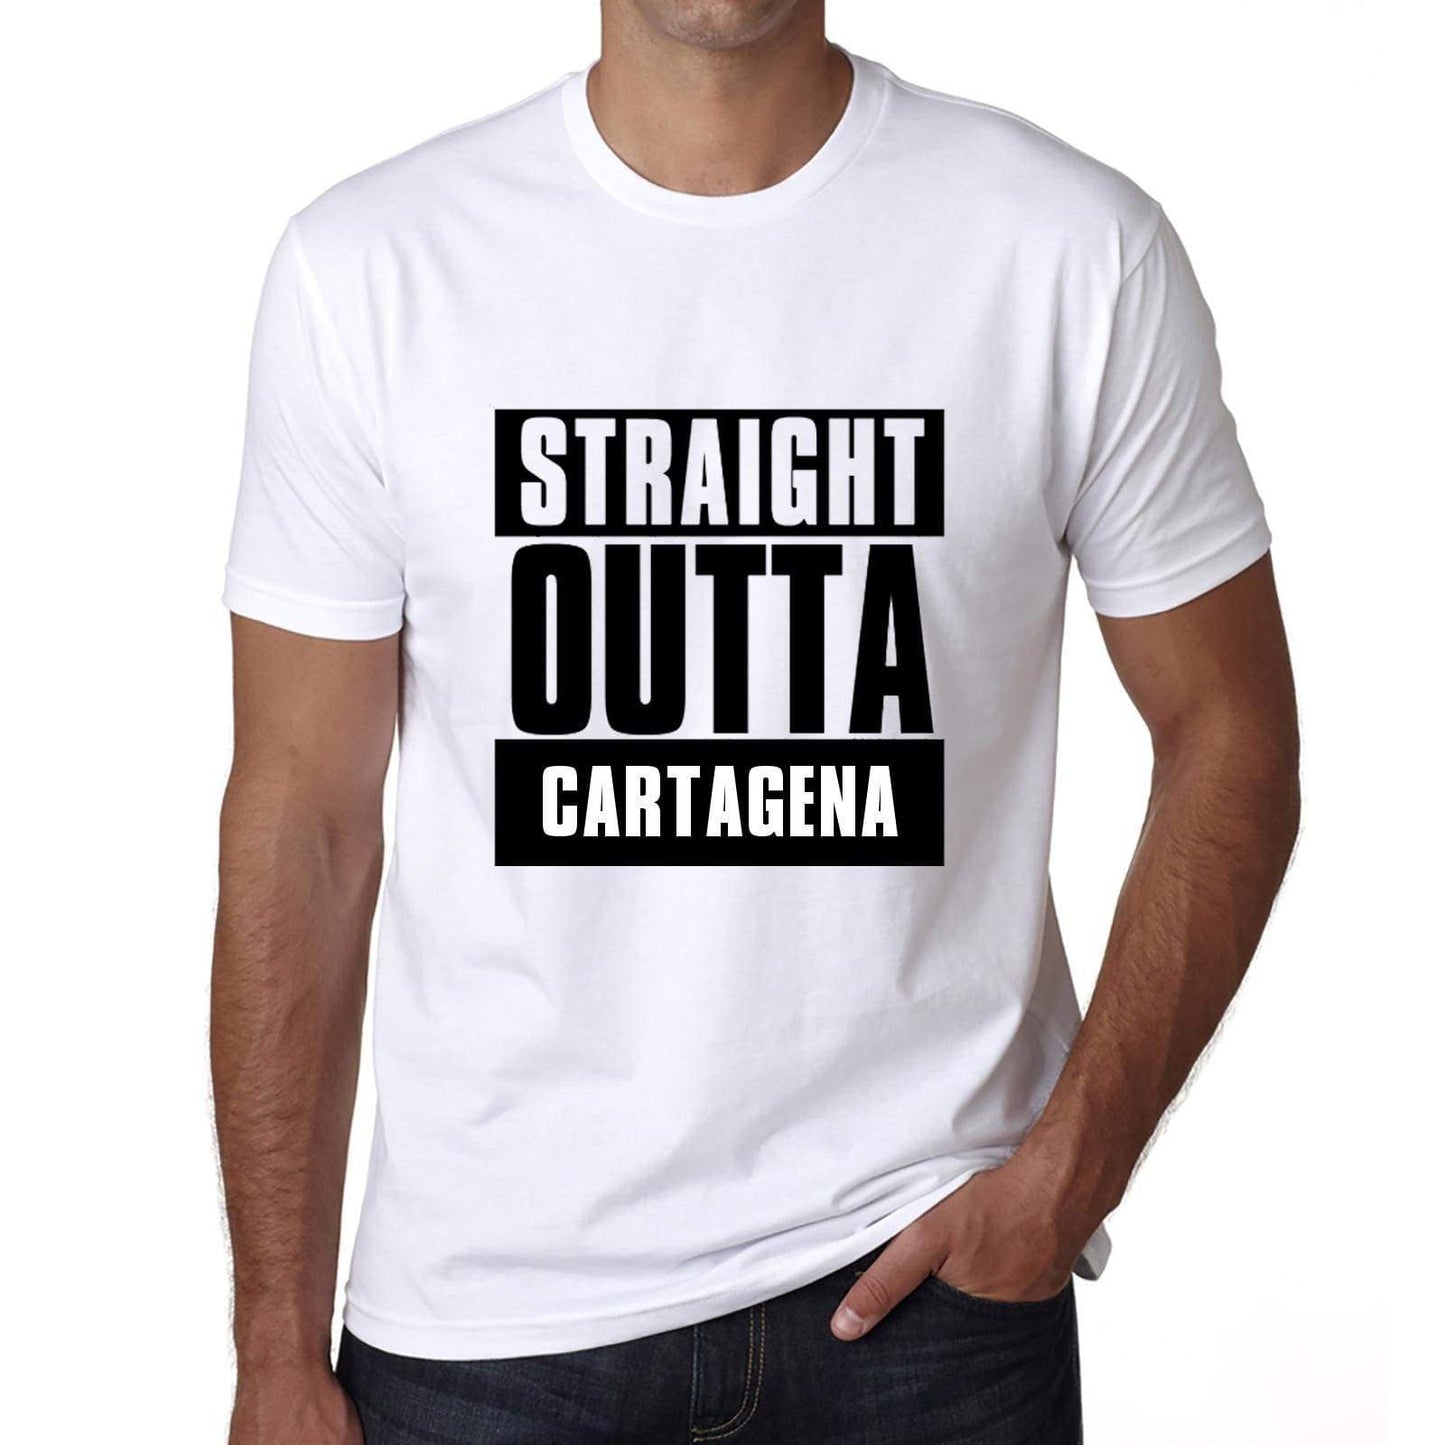 Straight Outta Cartagena Mens Short Sleeve Round Neck T-Shirt 00027 - White / S - Casual